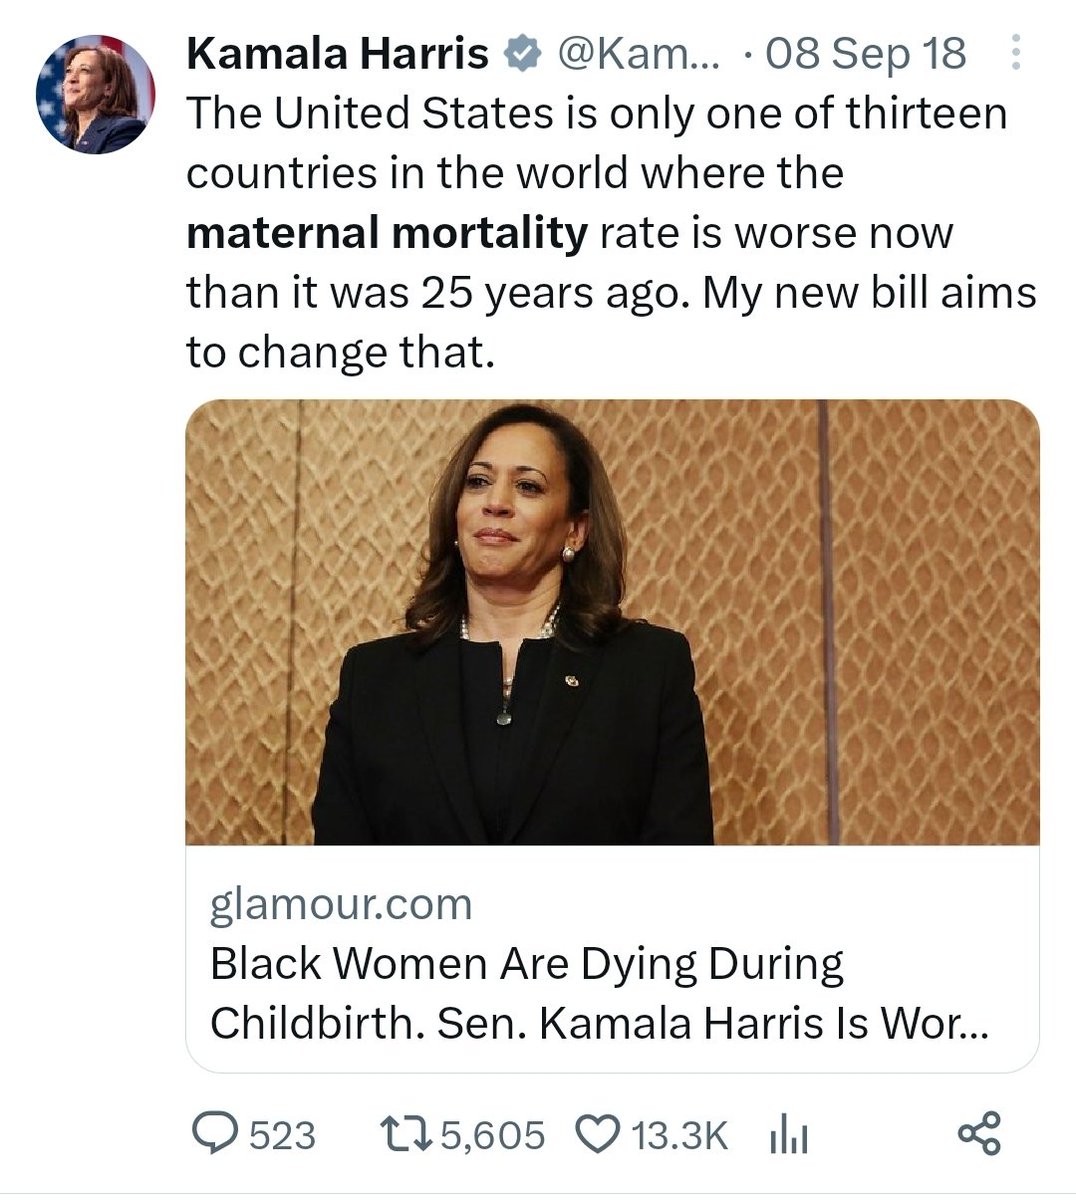 @WRAL Very sad, but very true. It's why I'm grateful that @VP Harris has been shining a spotlight on #maternalmortality for years. Now people are finally acknowledging it as a problem, mothers can start receiving proper healthcare.